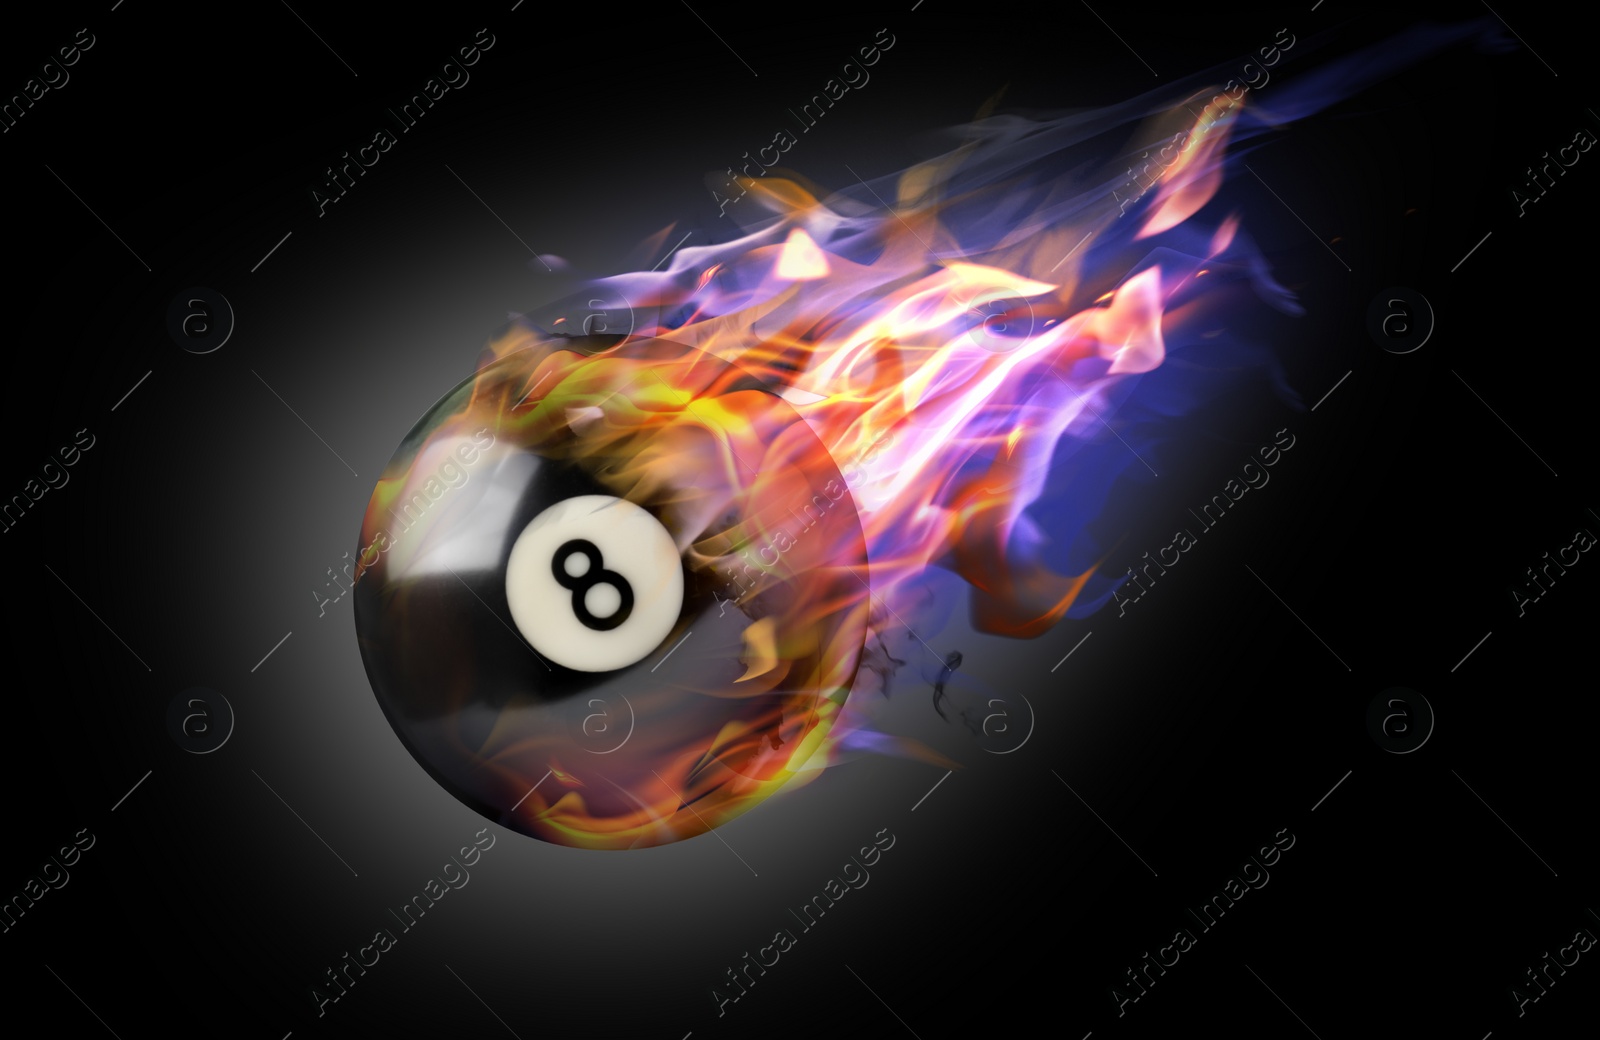 Image of Billiard ball with number 8 in fire flying on dark background